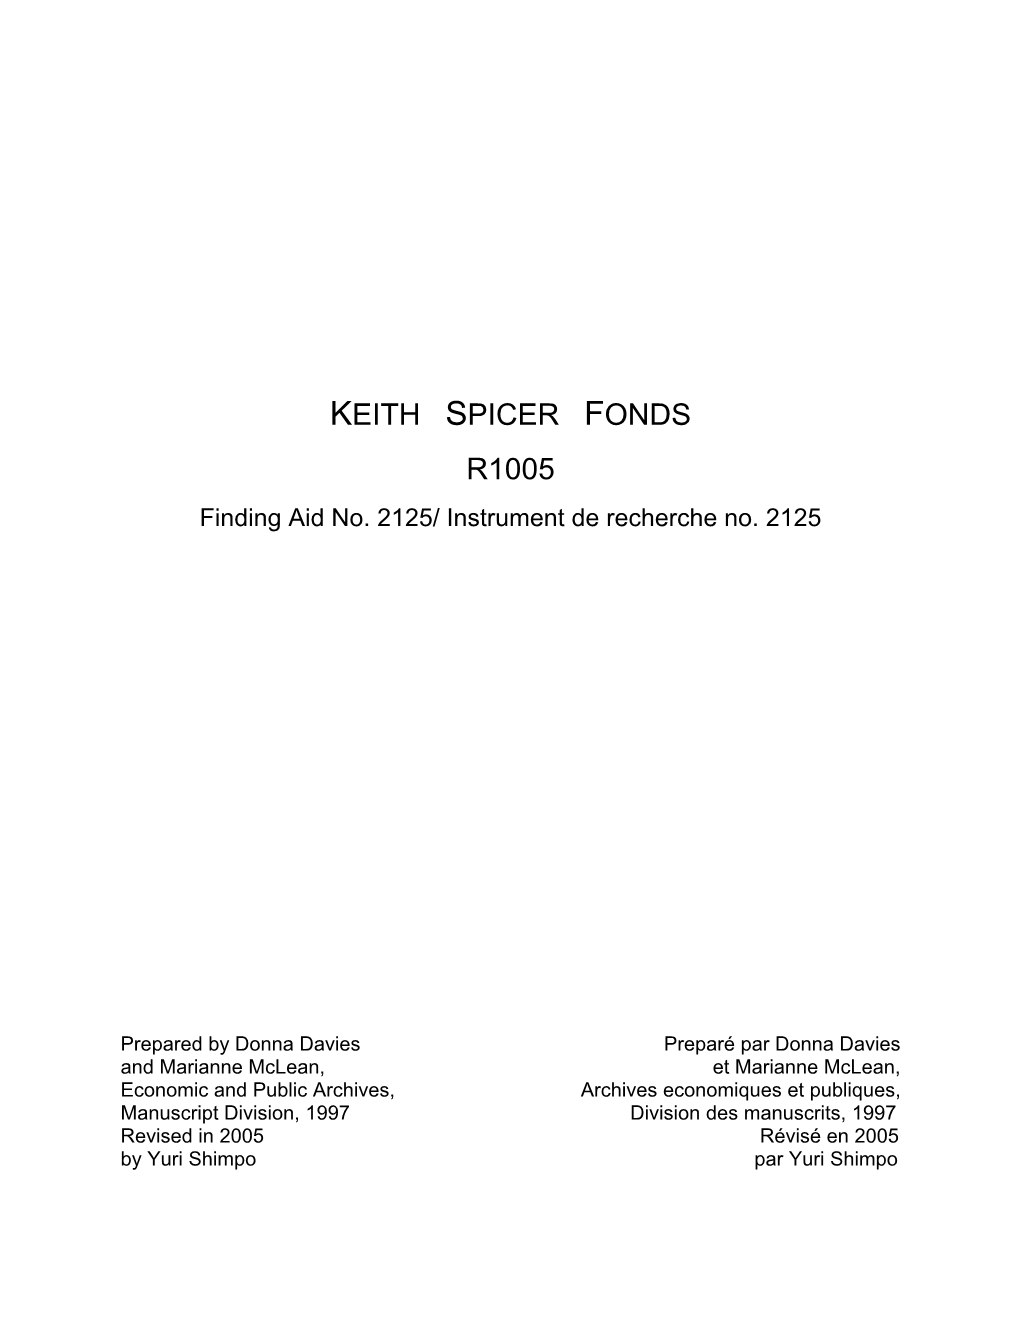 KEITH SPICER FONDS R1005 Finding Aid No